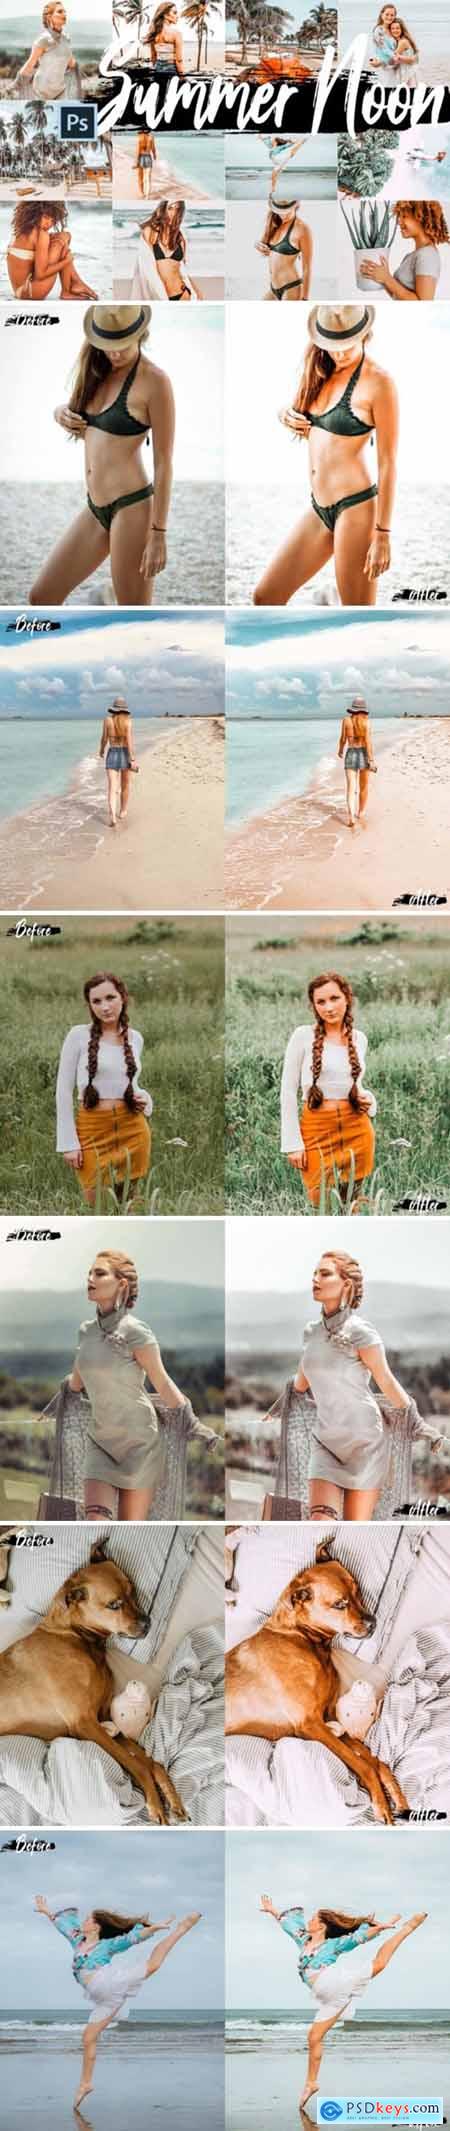 5 Summer Noon Photoshop Actions 1725146